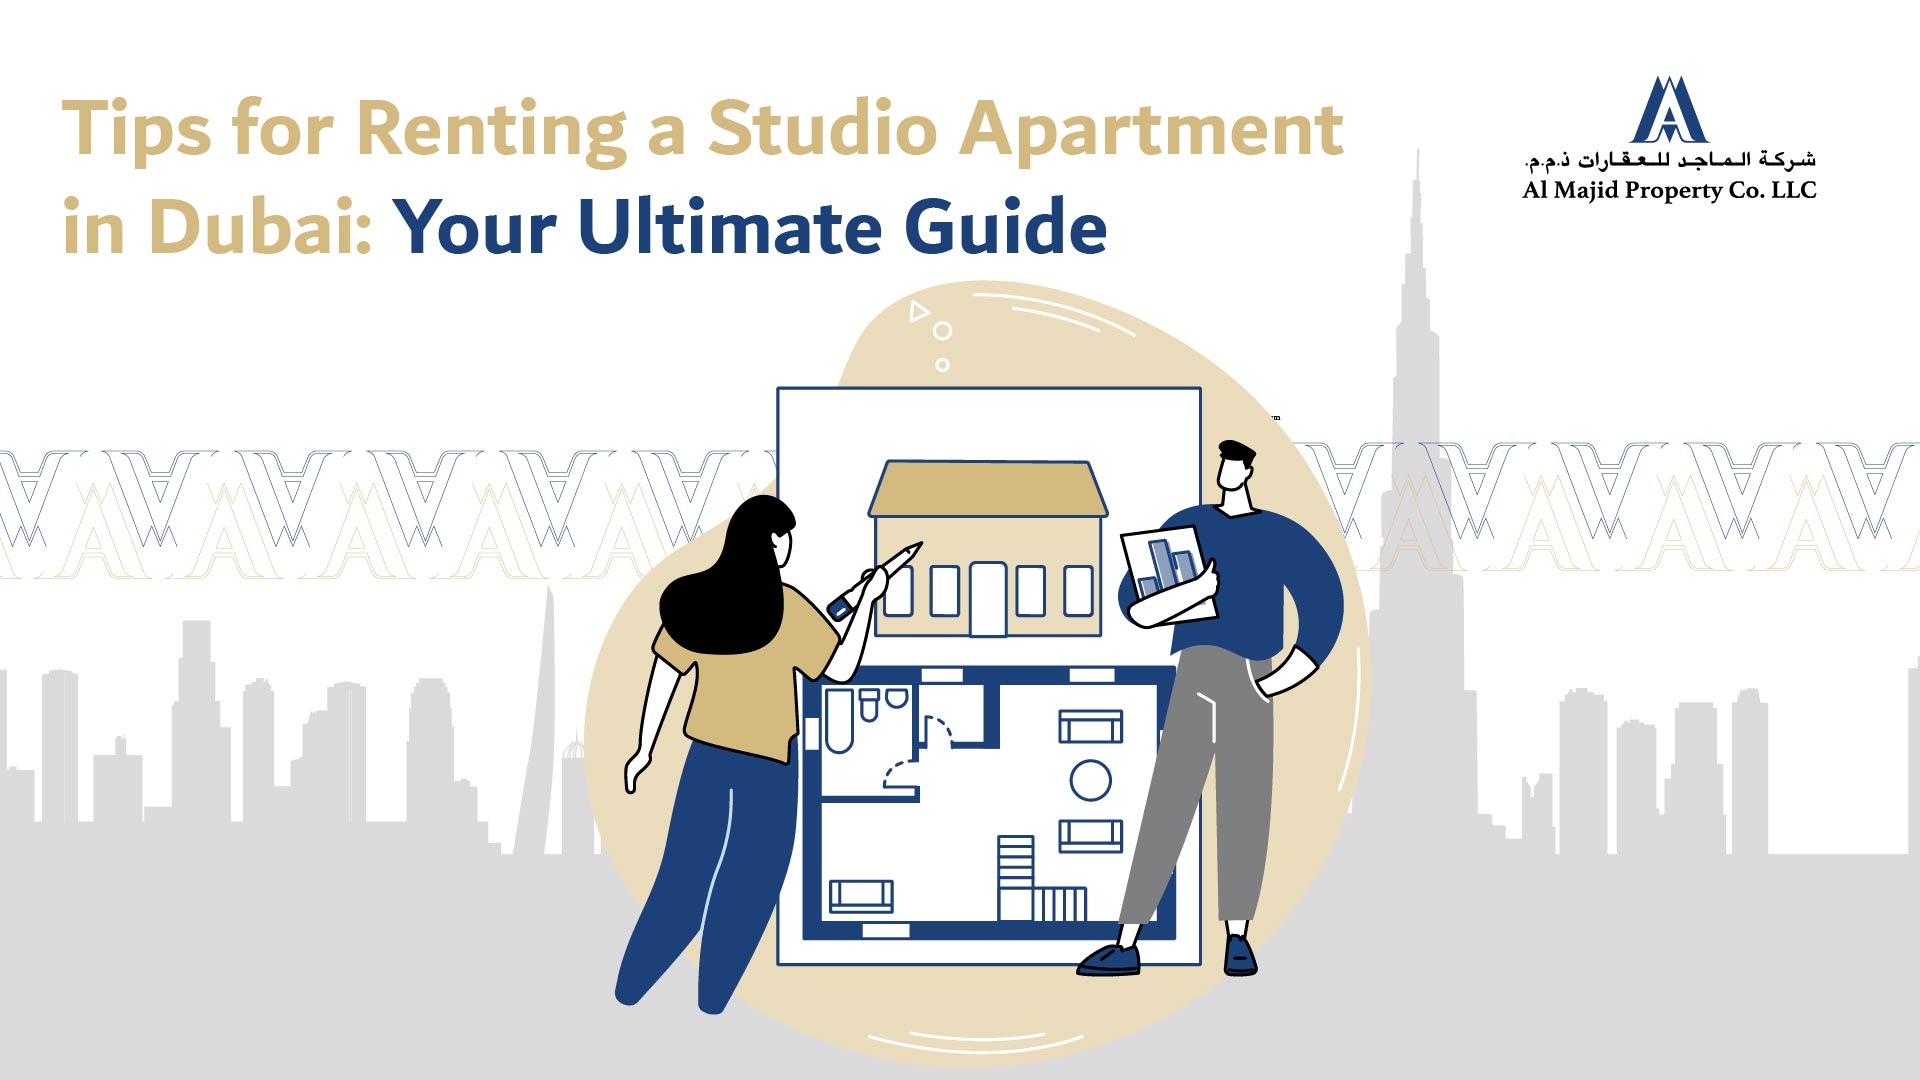 Tips for Renting a Studio Apartment